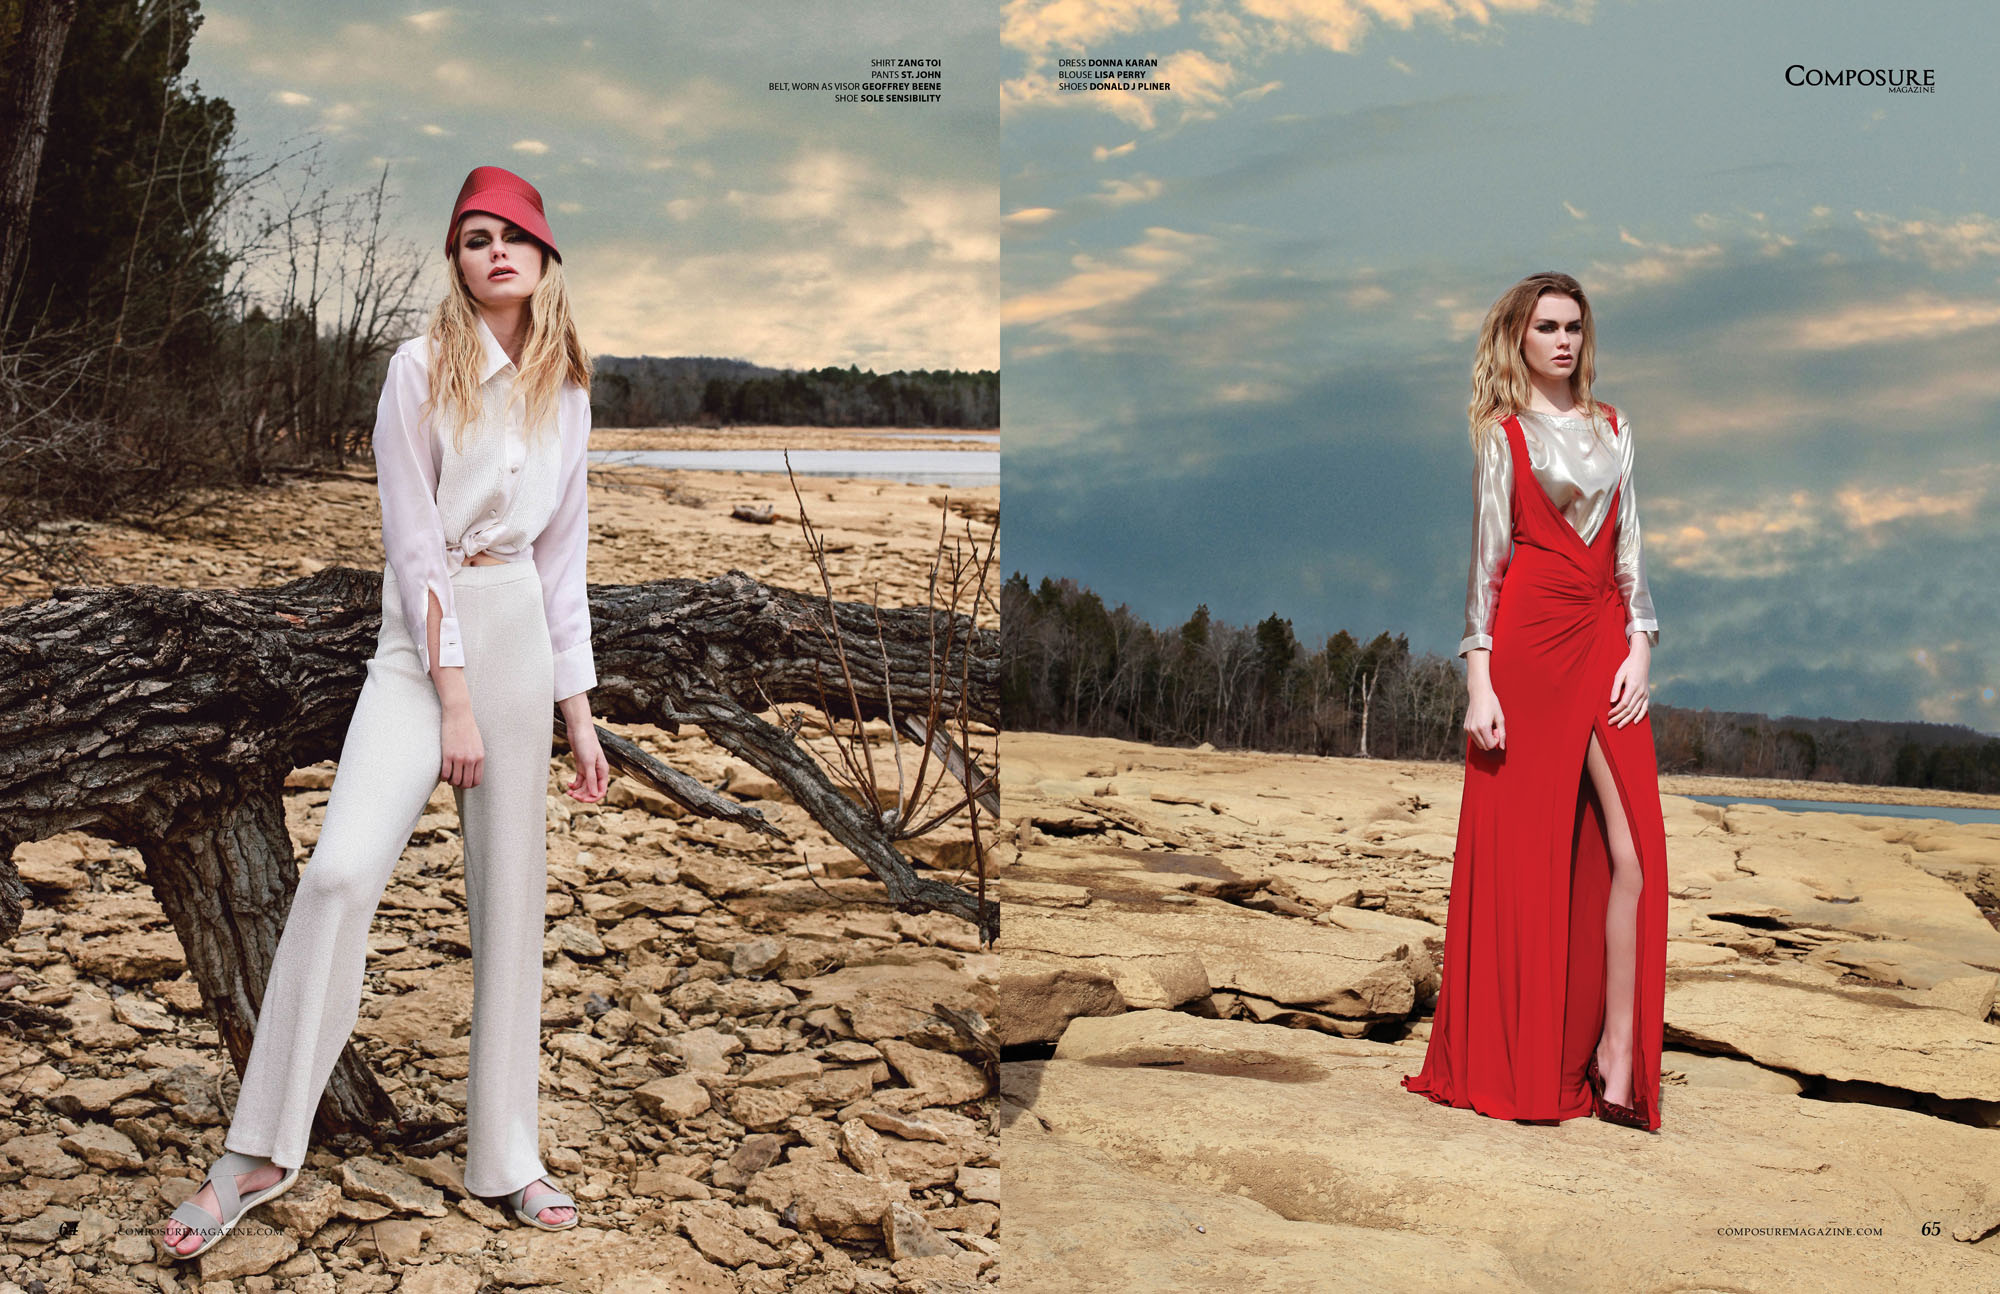 Fashion Editorial by Amy M. Phillips